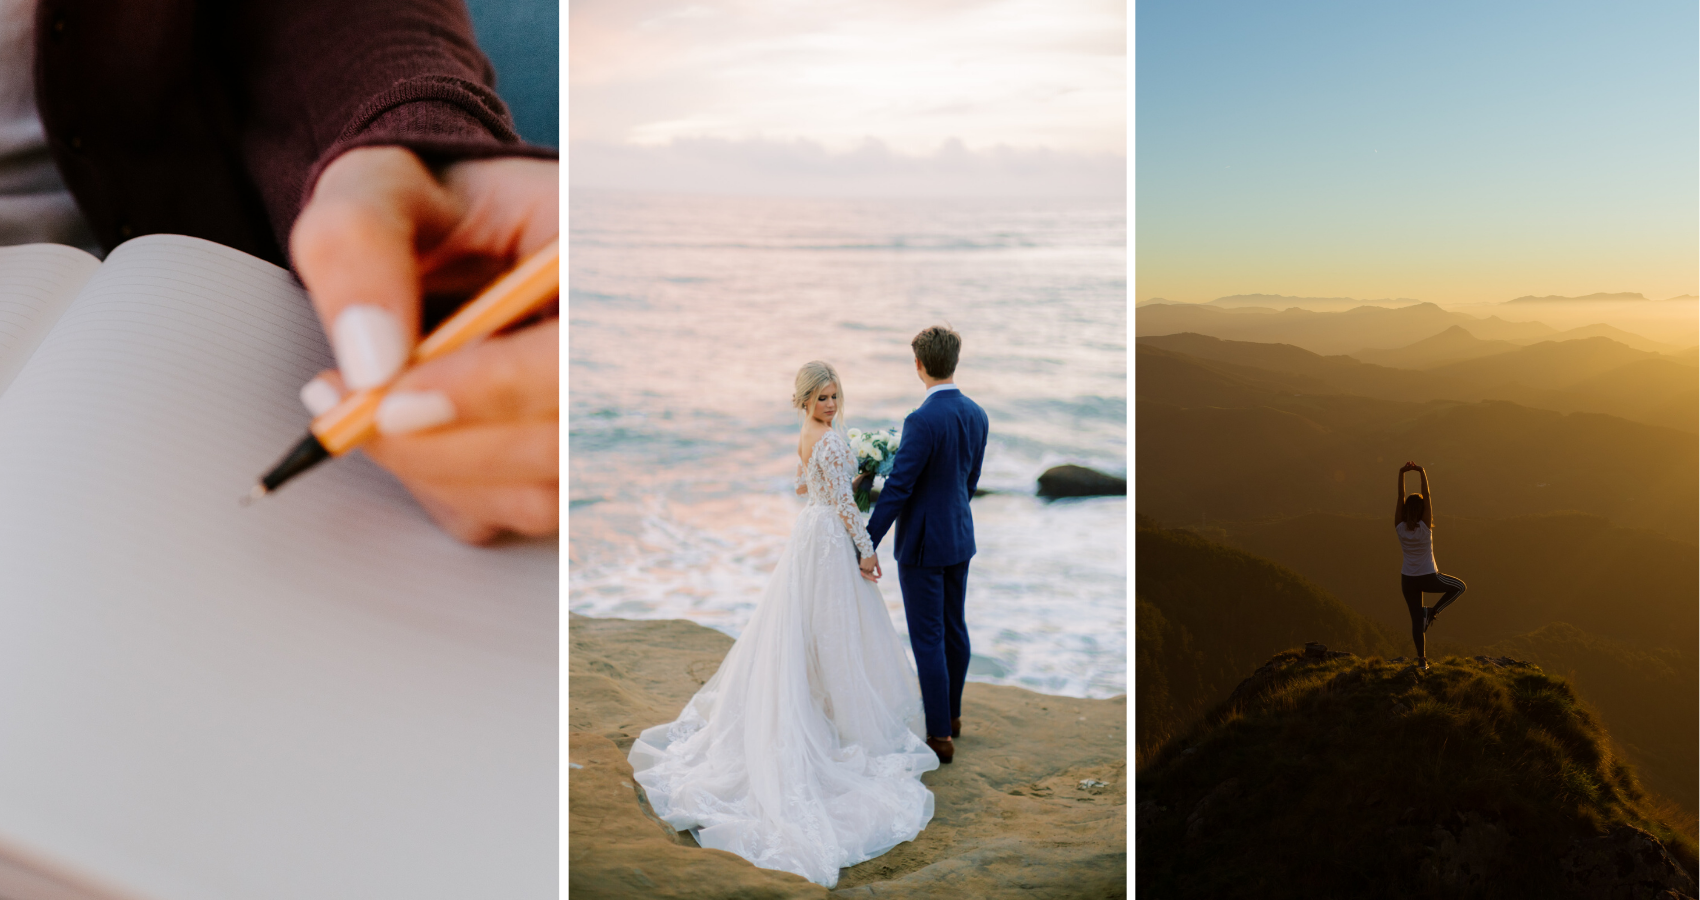 Mental Health Awareness Blog Collage From Maggie Sottero Designs Of Woman Journaling, A Bride Wearing A Wedding Dress Called Zander By Sottero And Midgley With Groom On Cliff, And A Woman Doing Sunset Yoga